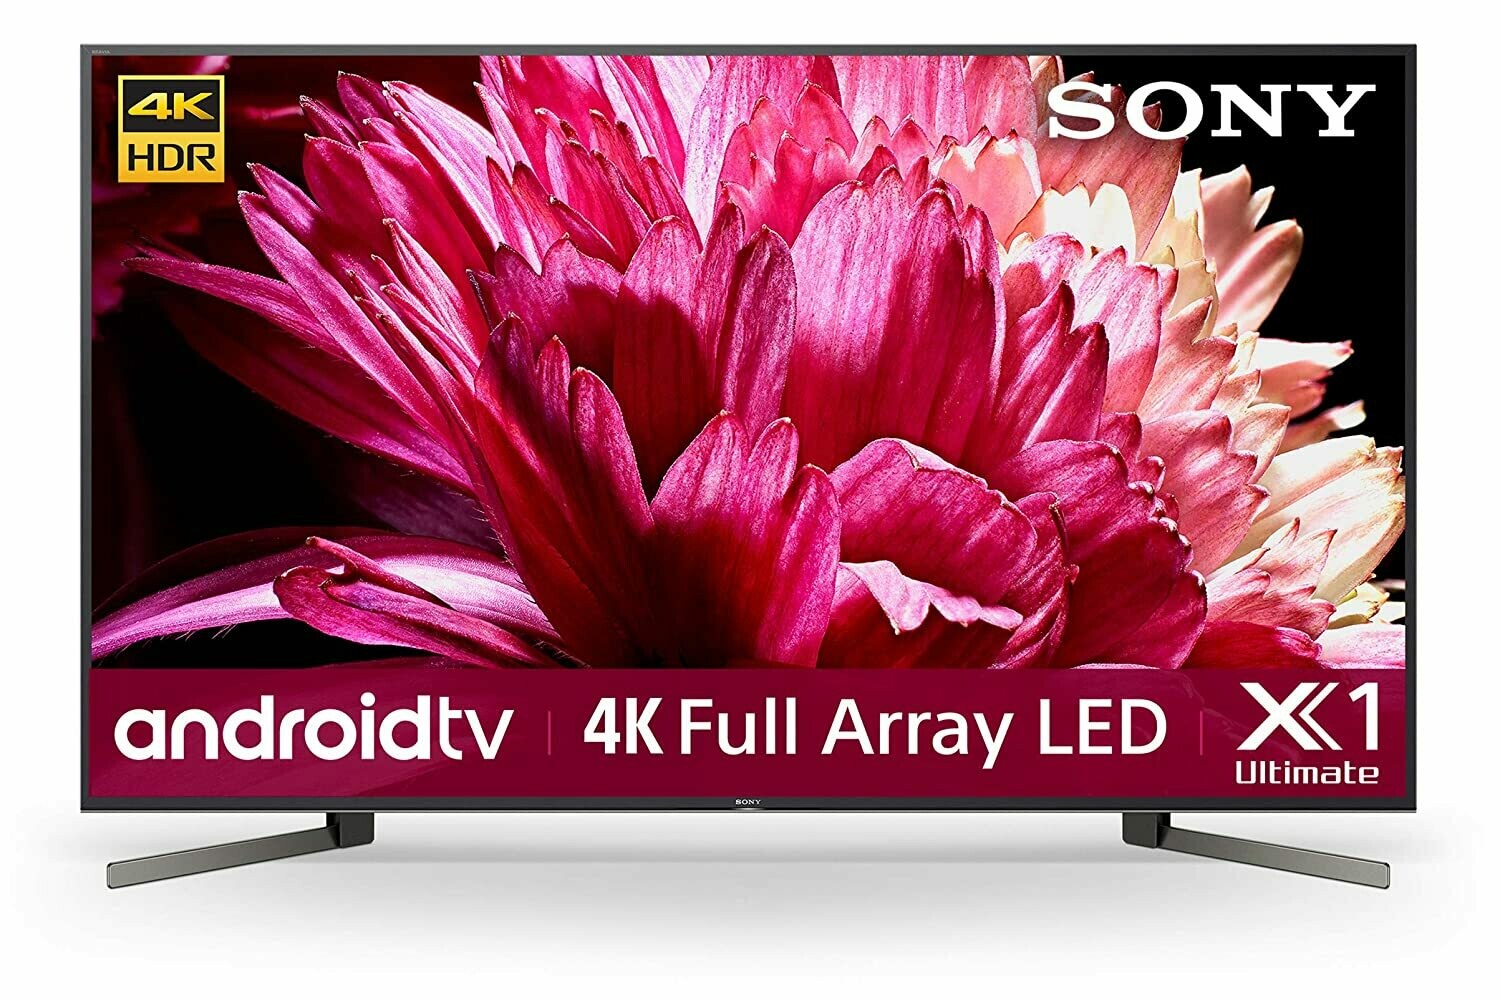 Sony Bravia 214 cm (85 inches) 4K Ultra HD Certificated Android Smart LED TV KD-85X9500G